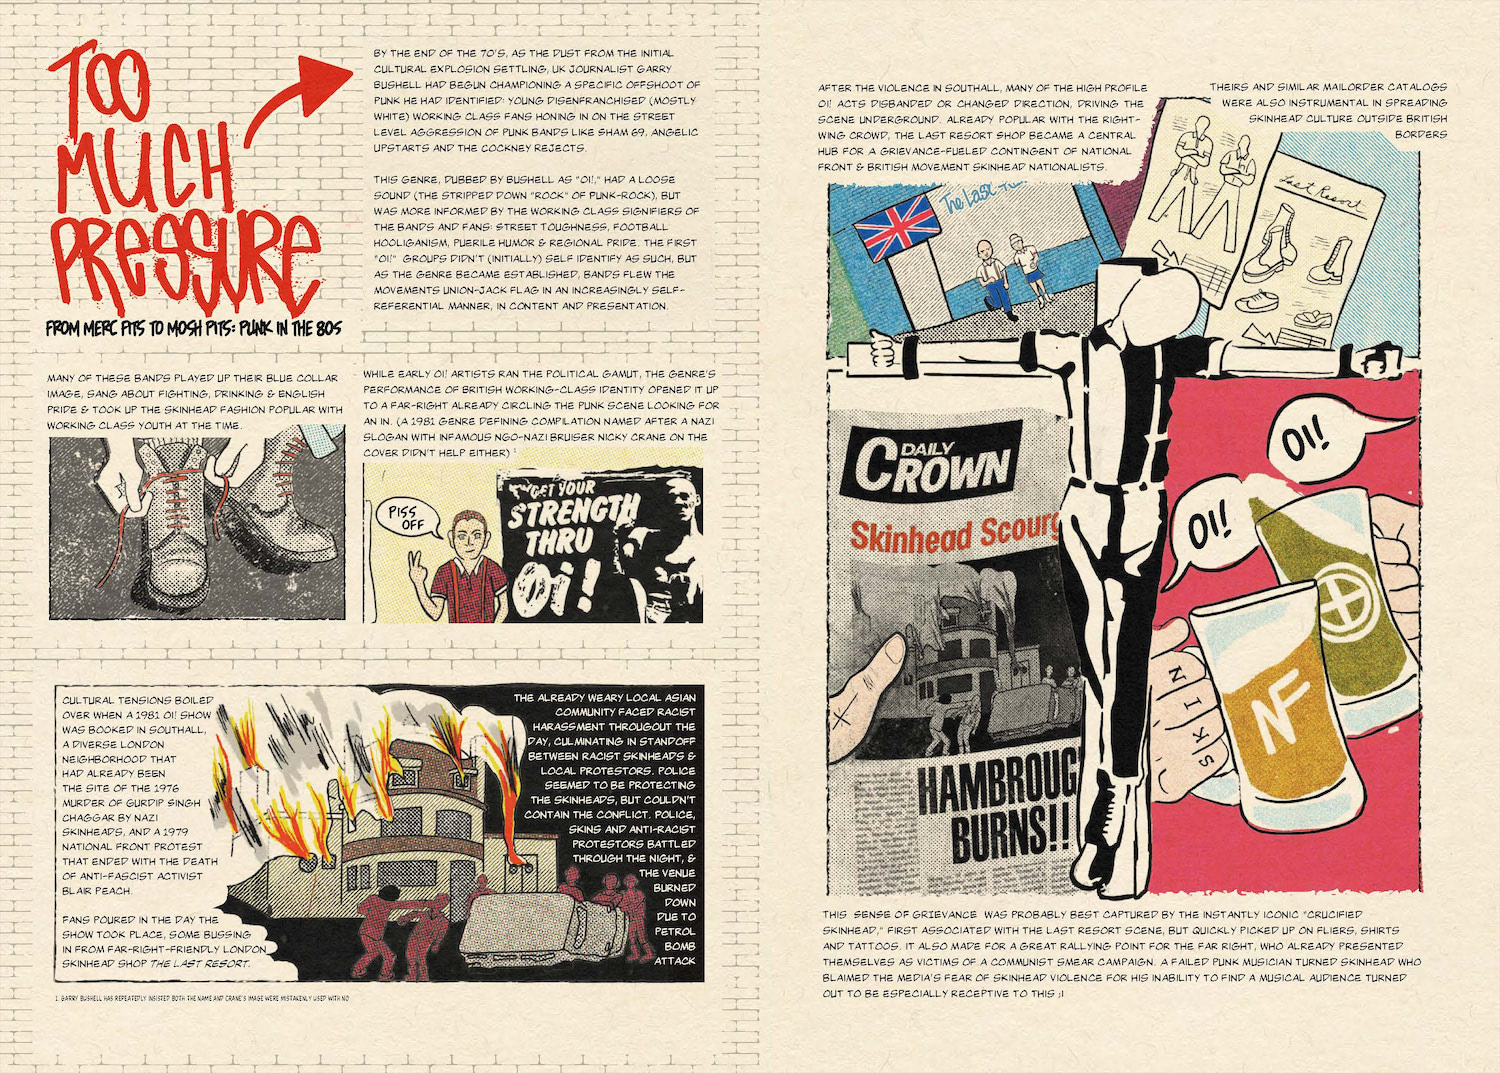 A four-color style comic book spread- with a stylized title that says 